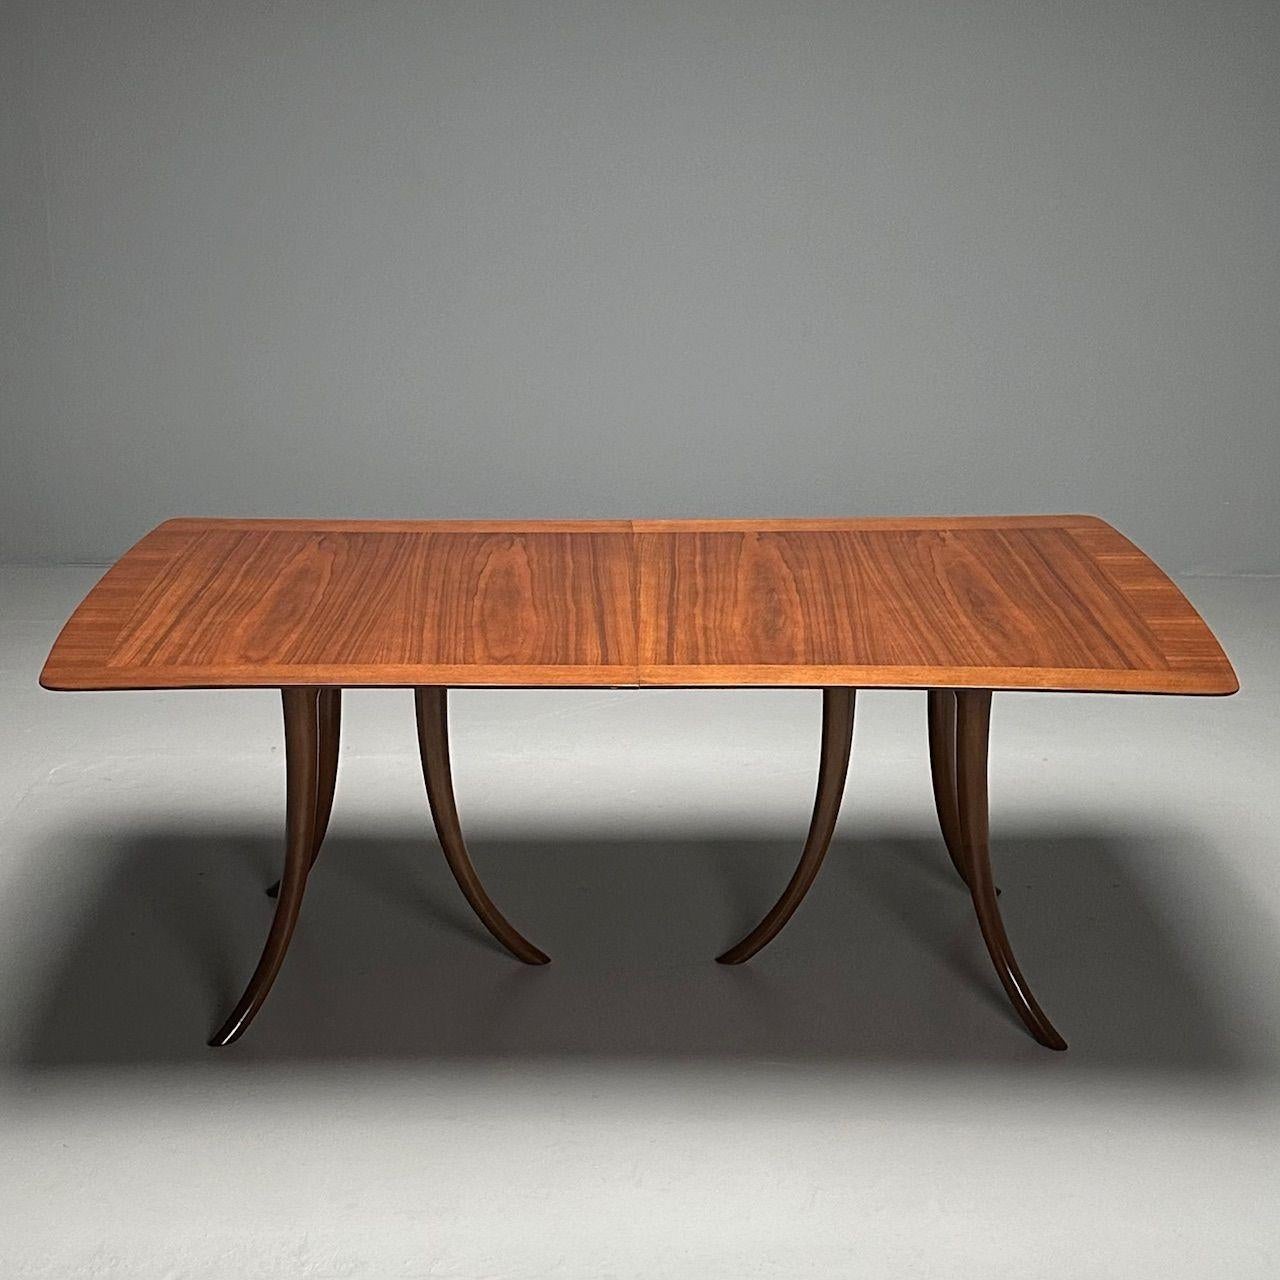 T.H. Robsjohn-Gibbings, Mid-Century Modern, Saber Leg Dining Table, Walnut, 1956 In Good Condition For Sale In Stamford, CT